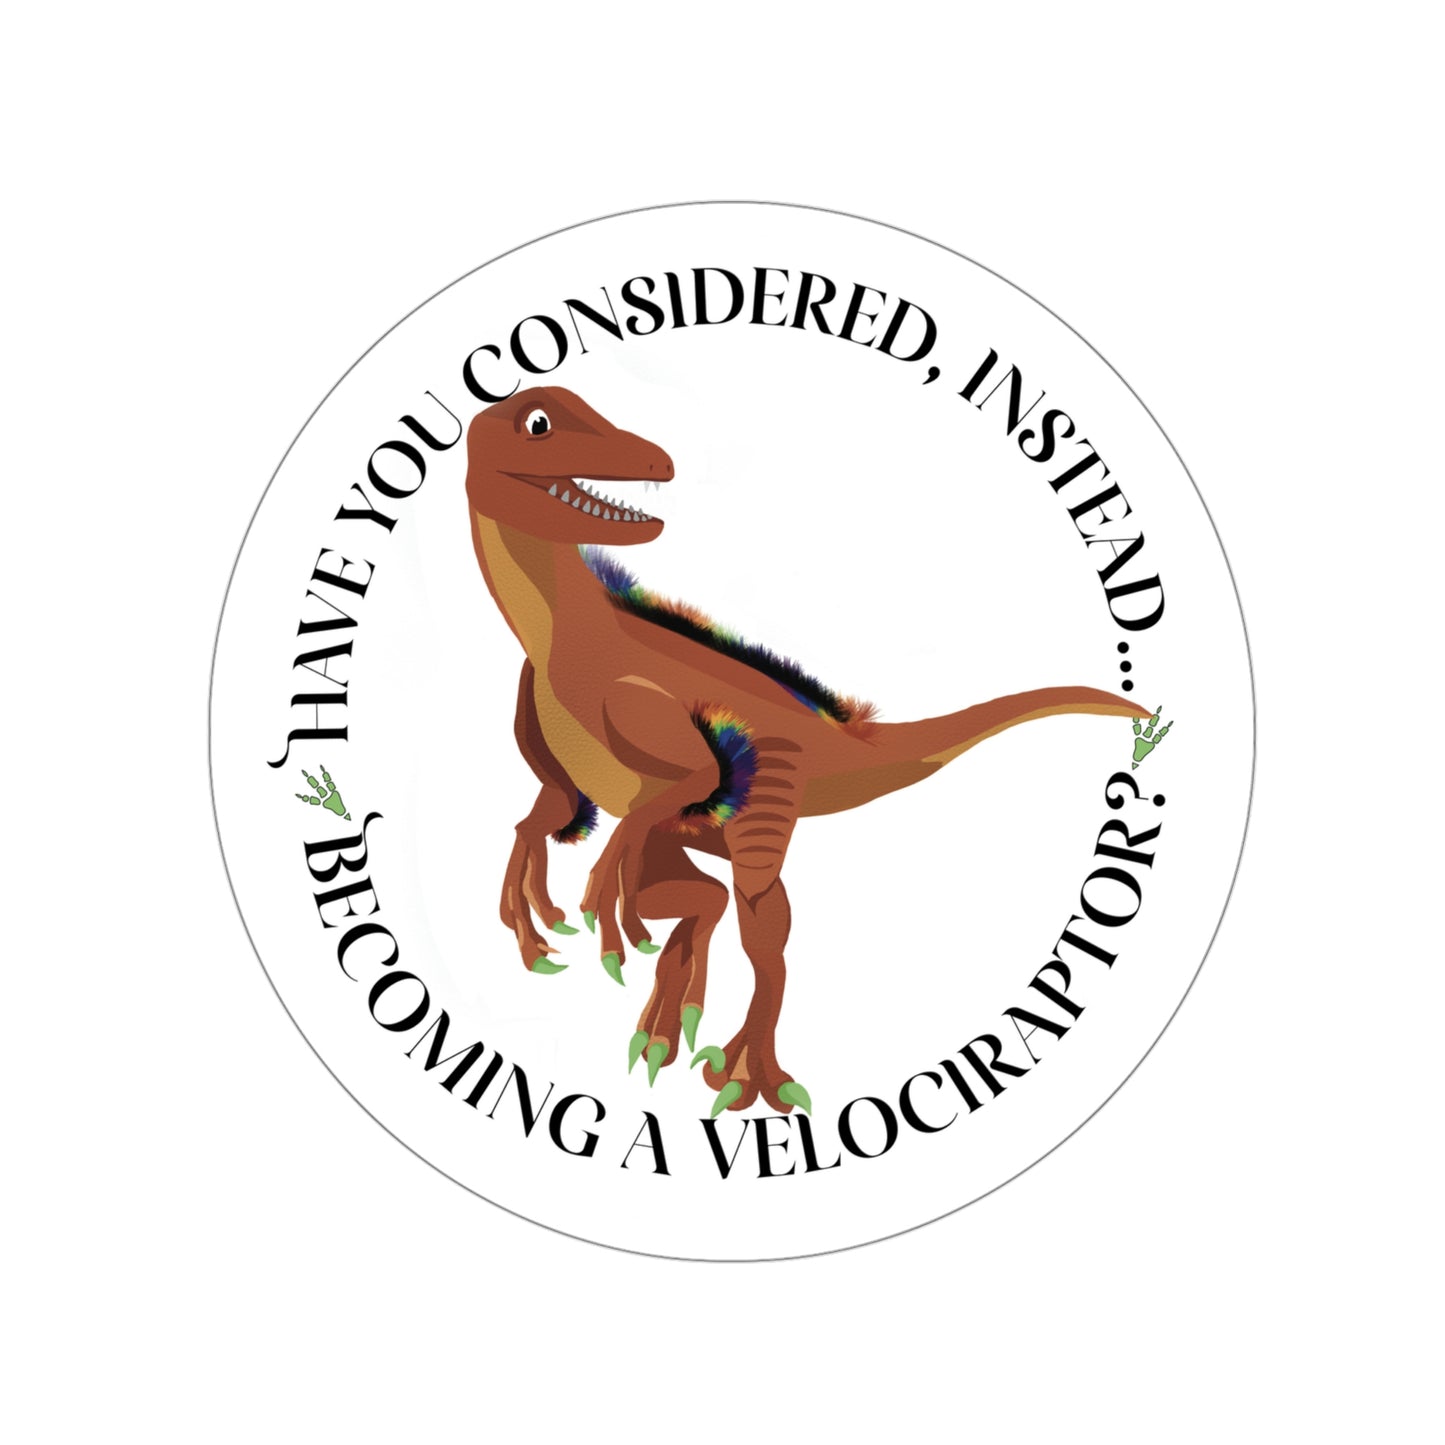 Have You Considered, Instead, Becoming A Velociraptor - Sticker